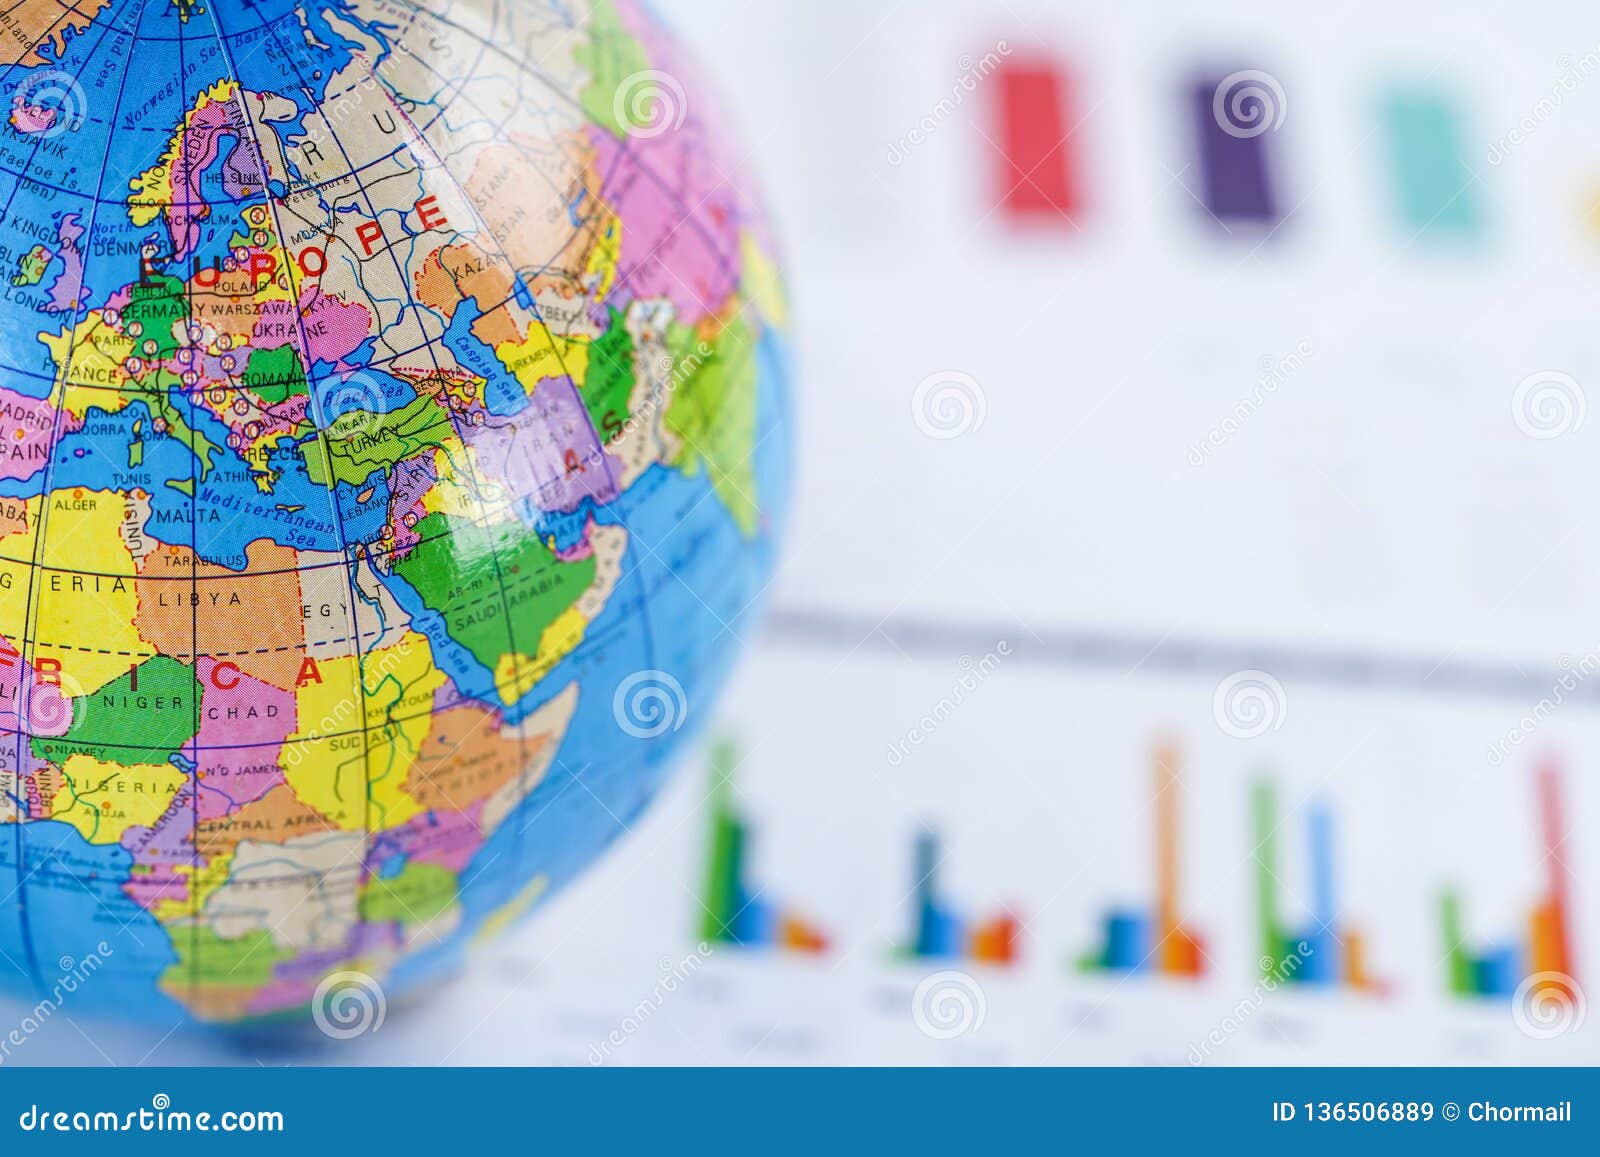 chart graph paper with globe world europe map on . finance, account, statistics, investment, analytic research data economy.